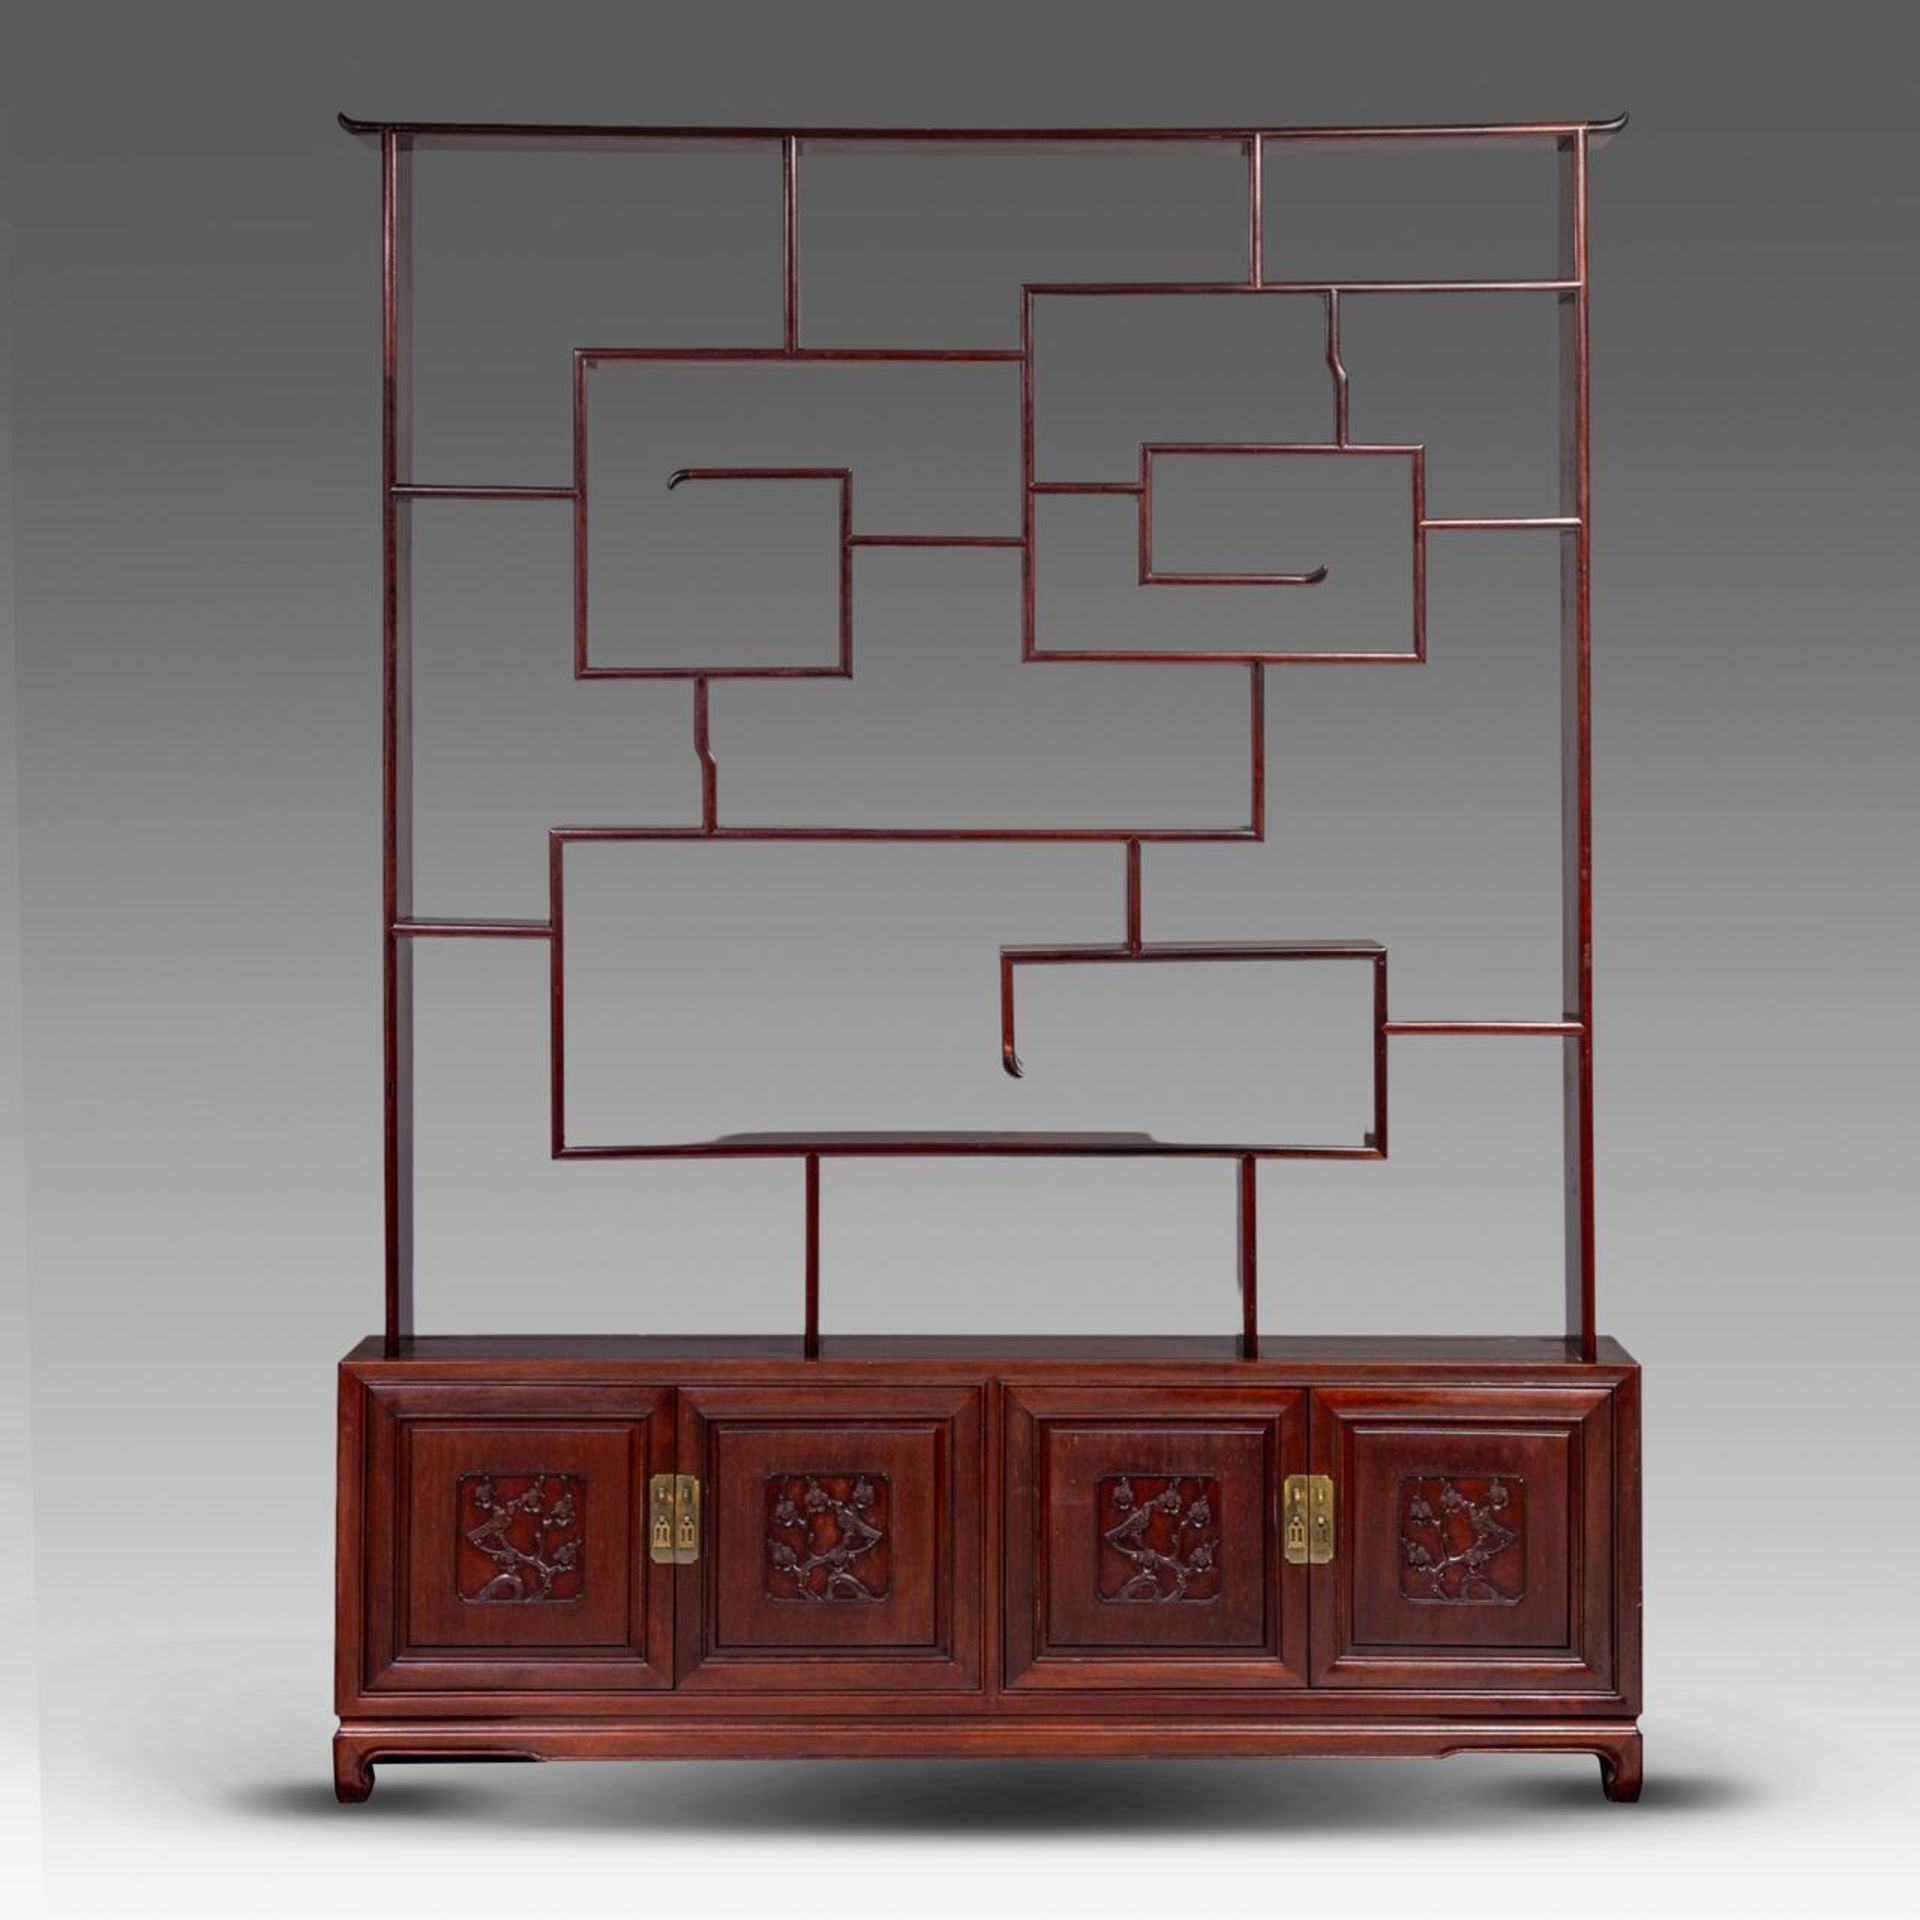 A Chinese hardwood display cabinet, 20thC, H 196 - W 151 - D 20 cm - Image 3 of 4